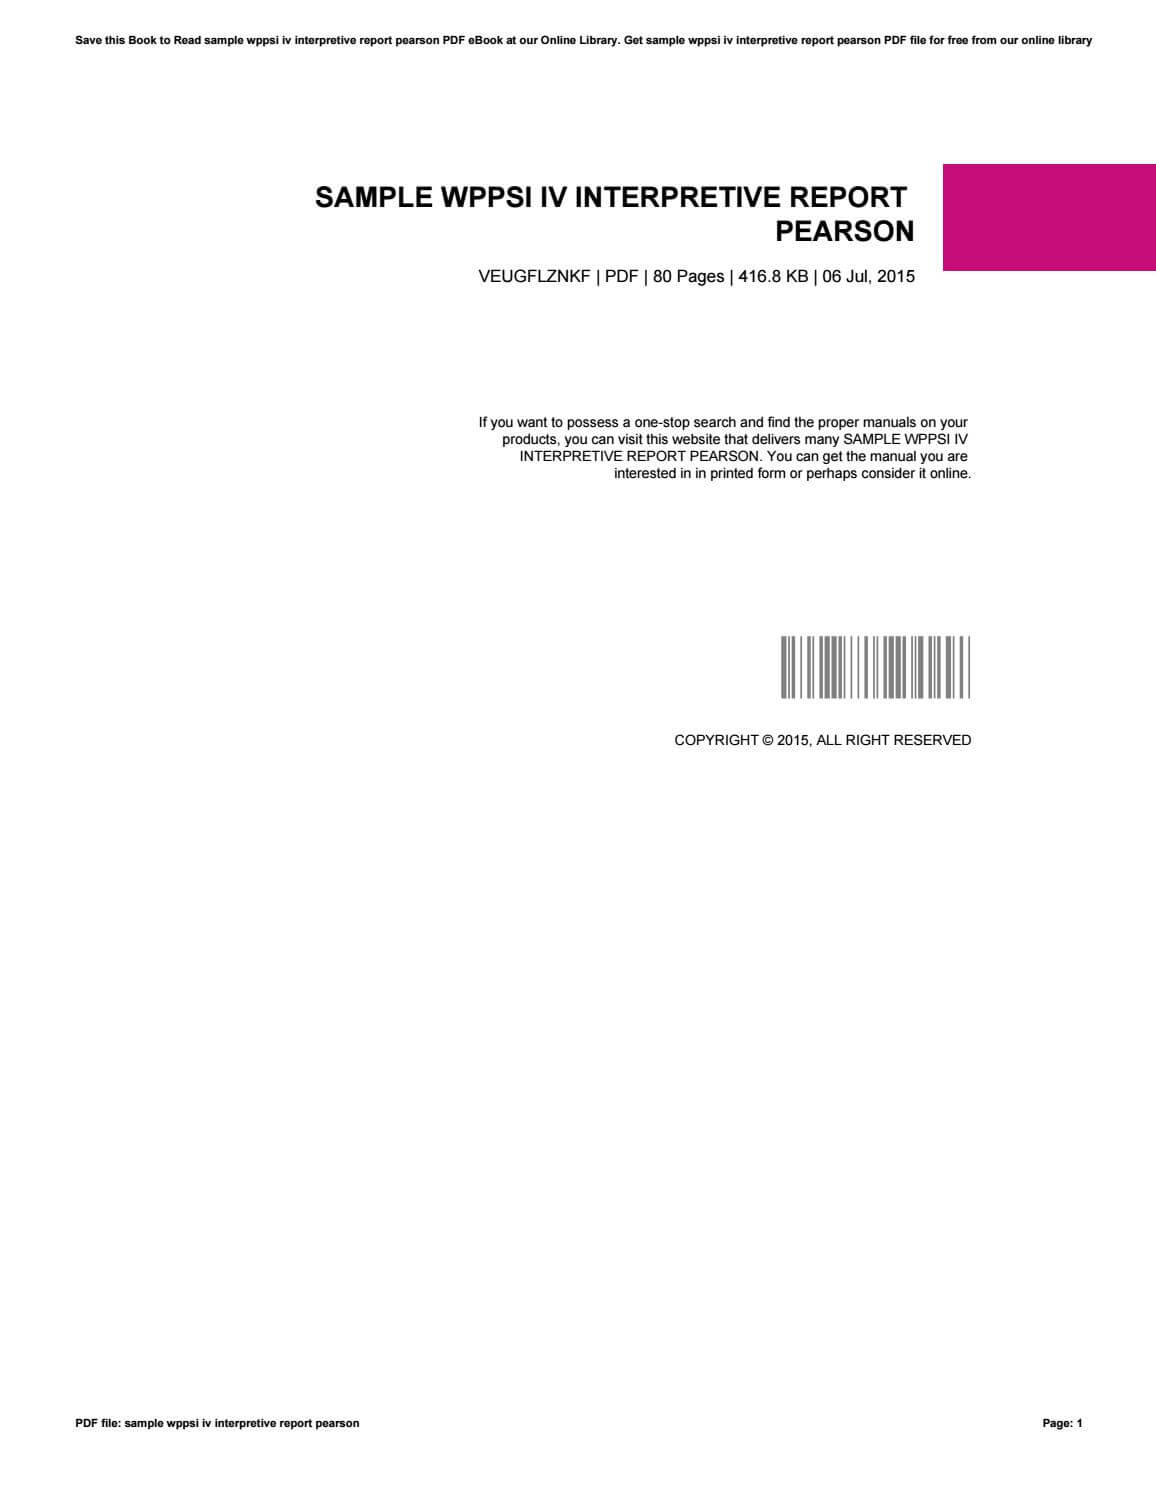 Sample Wppsi Iv Interpretive Report Pearson Within Wppsi Iv Report Template